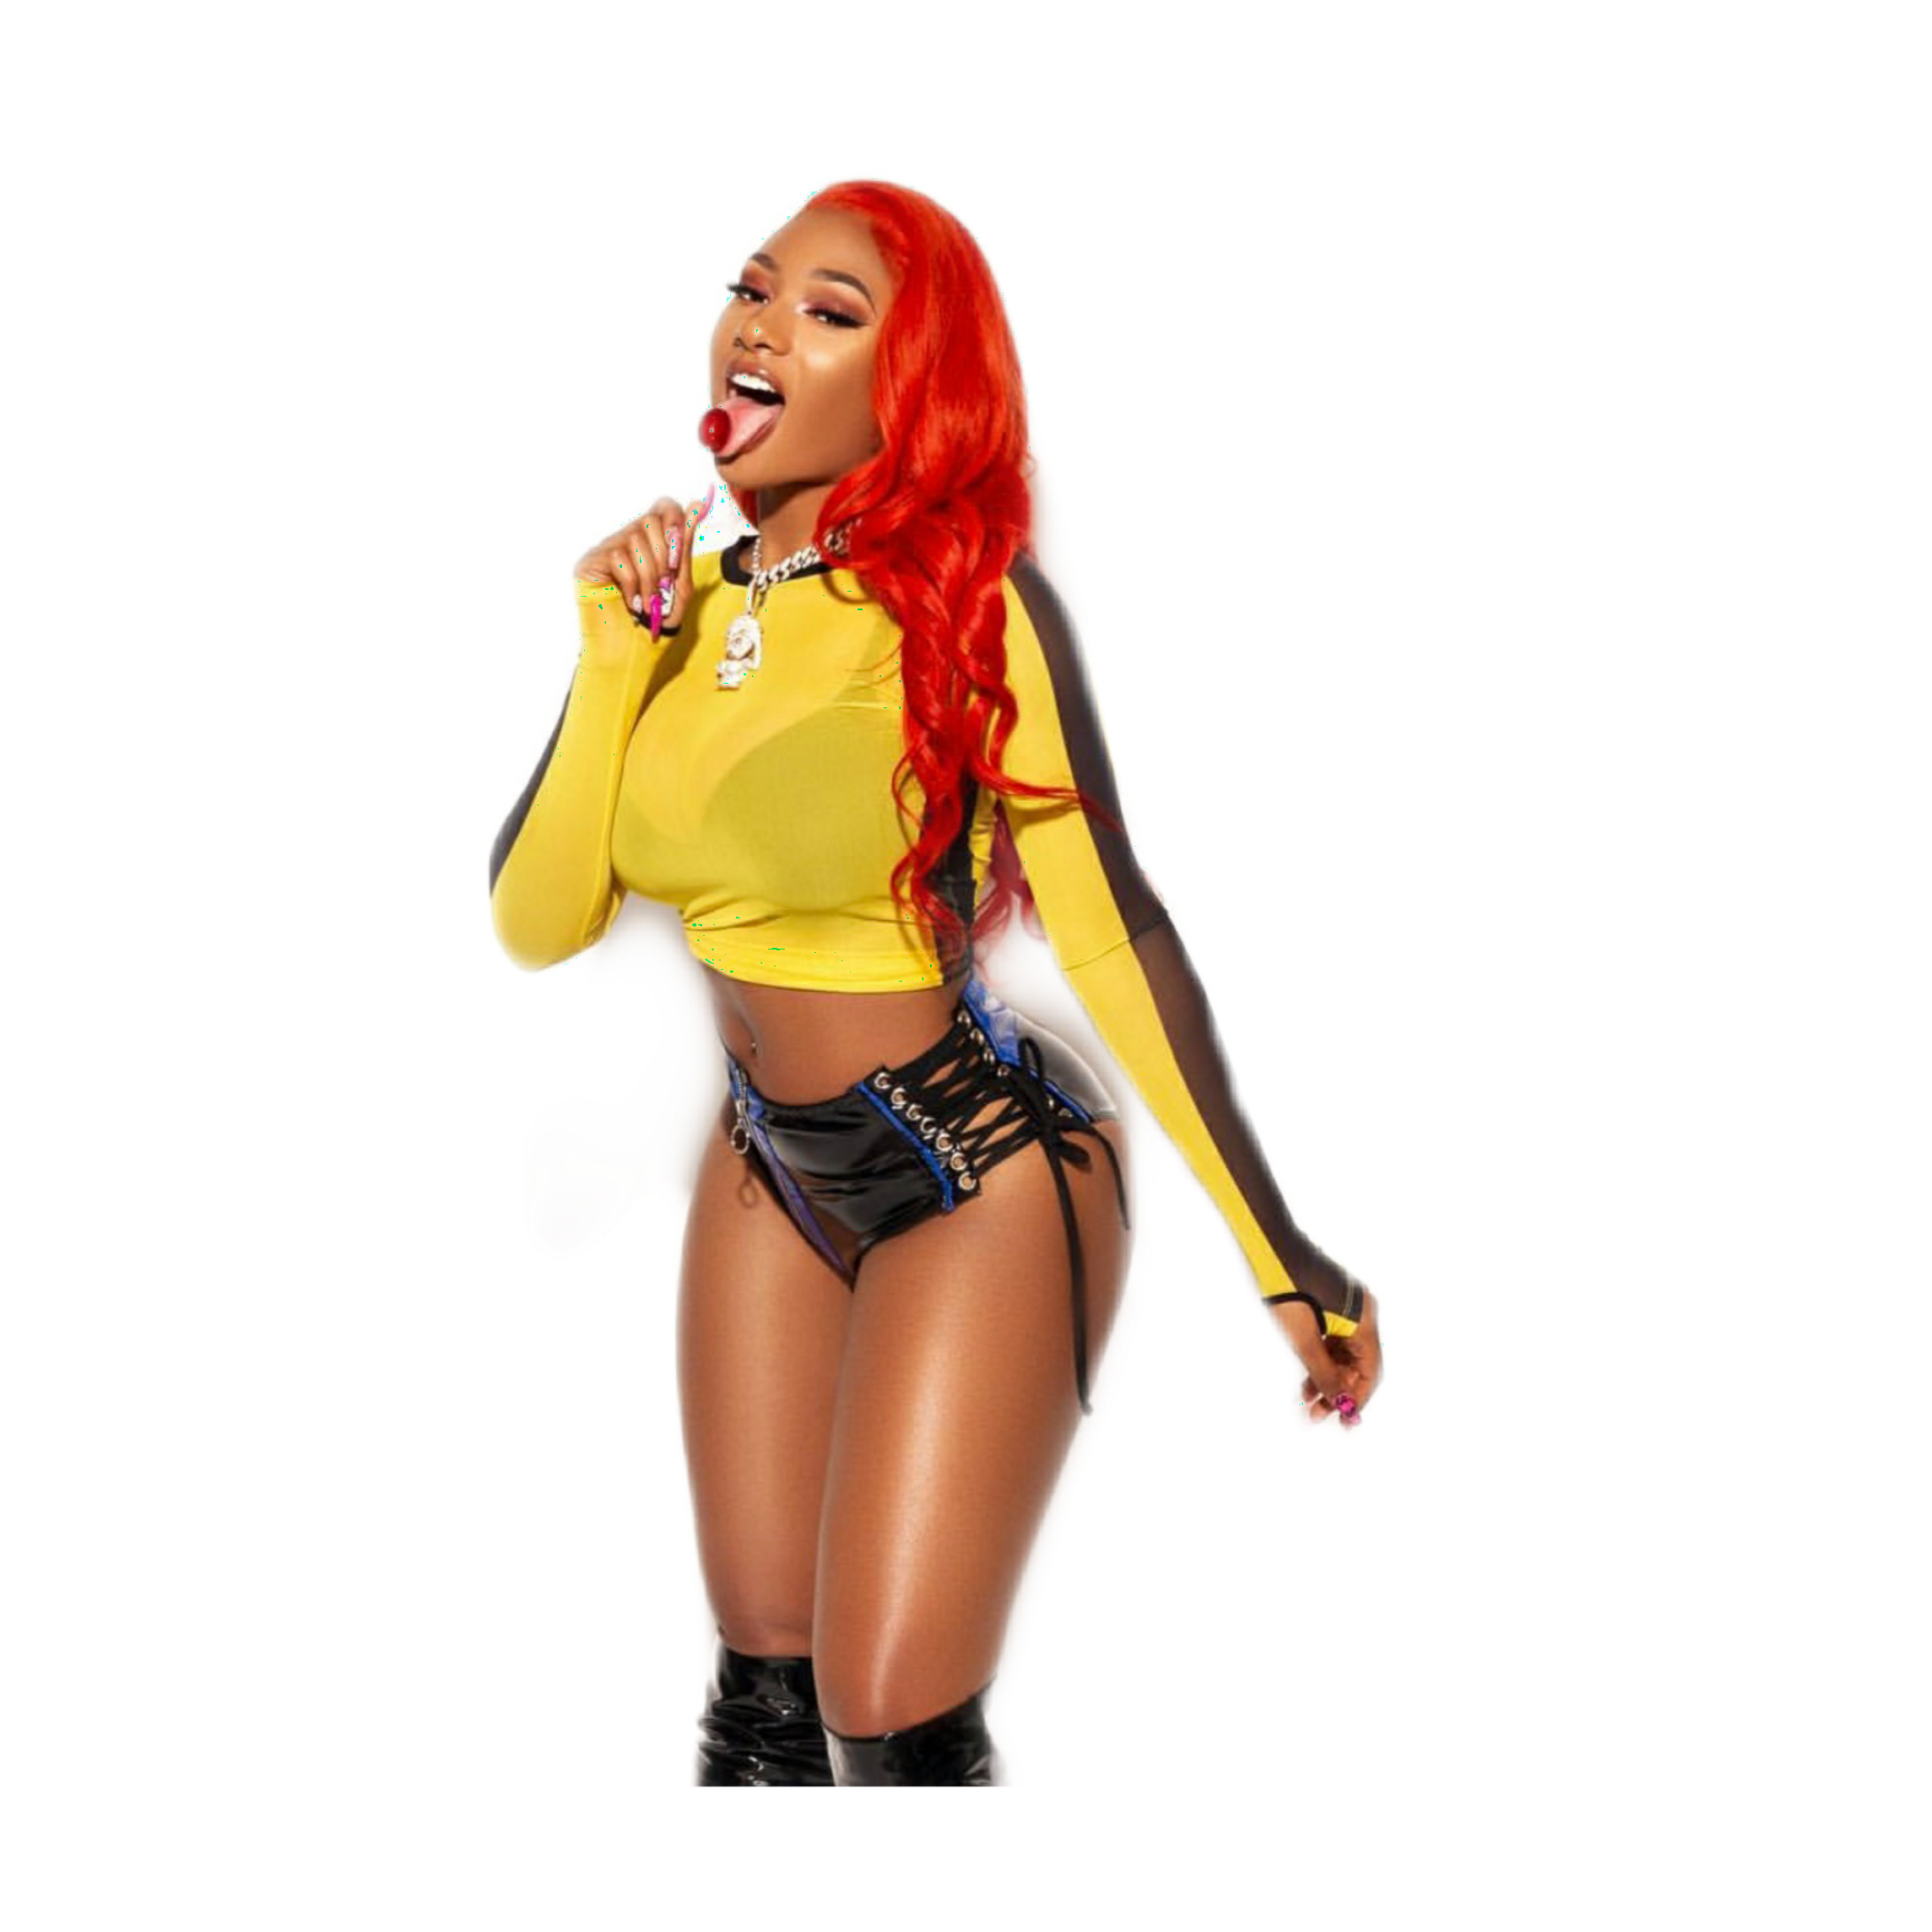 This visual is about freetoedit megantheestallion #freetoedit #megantheesta...